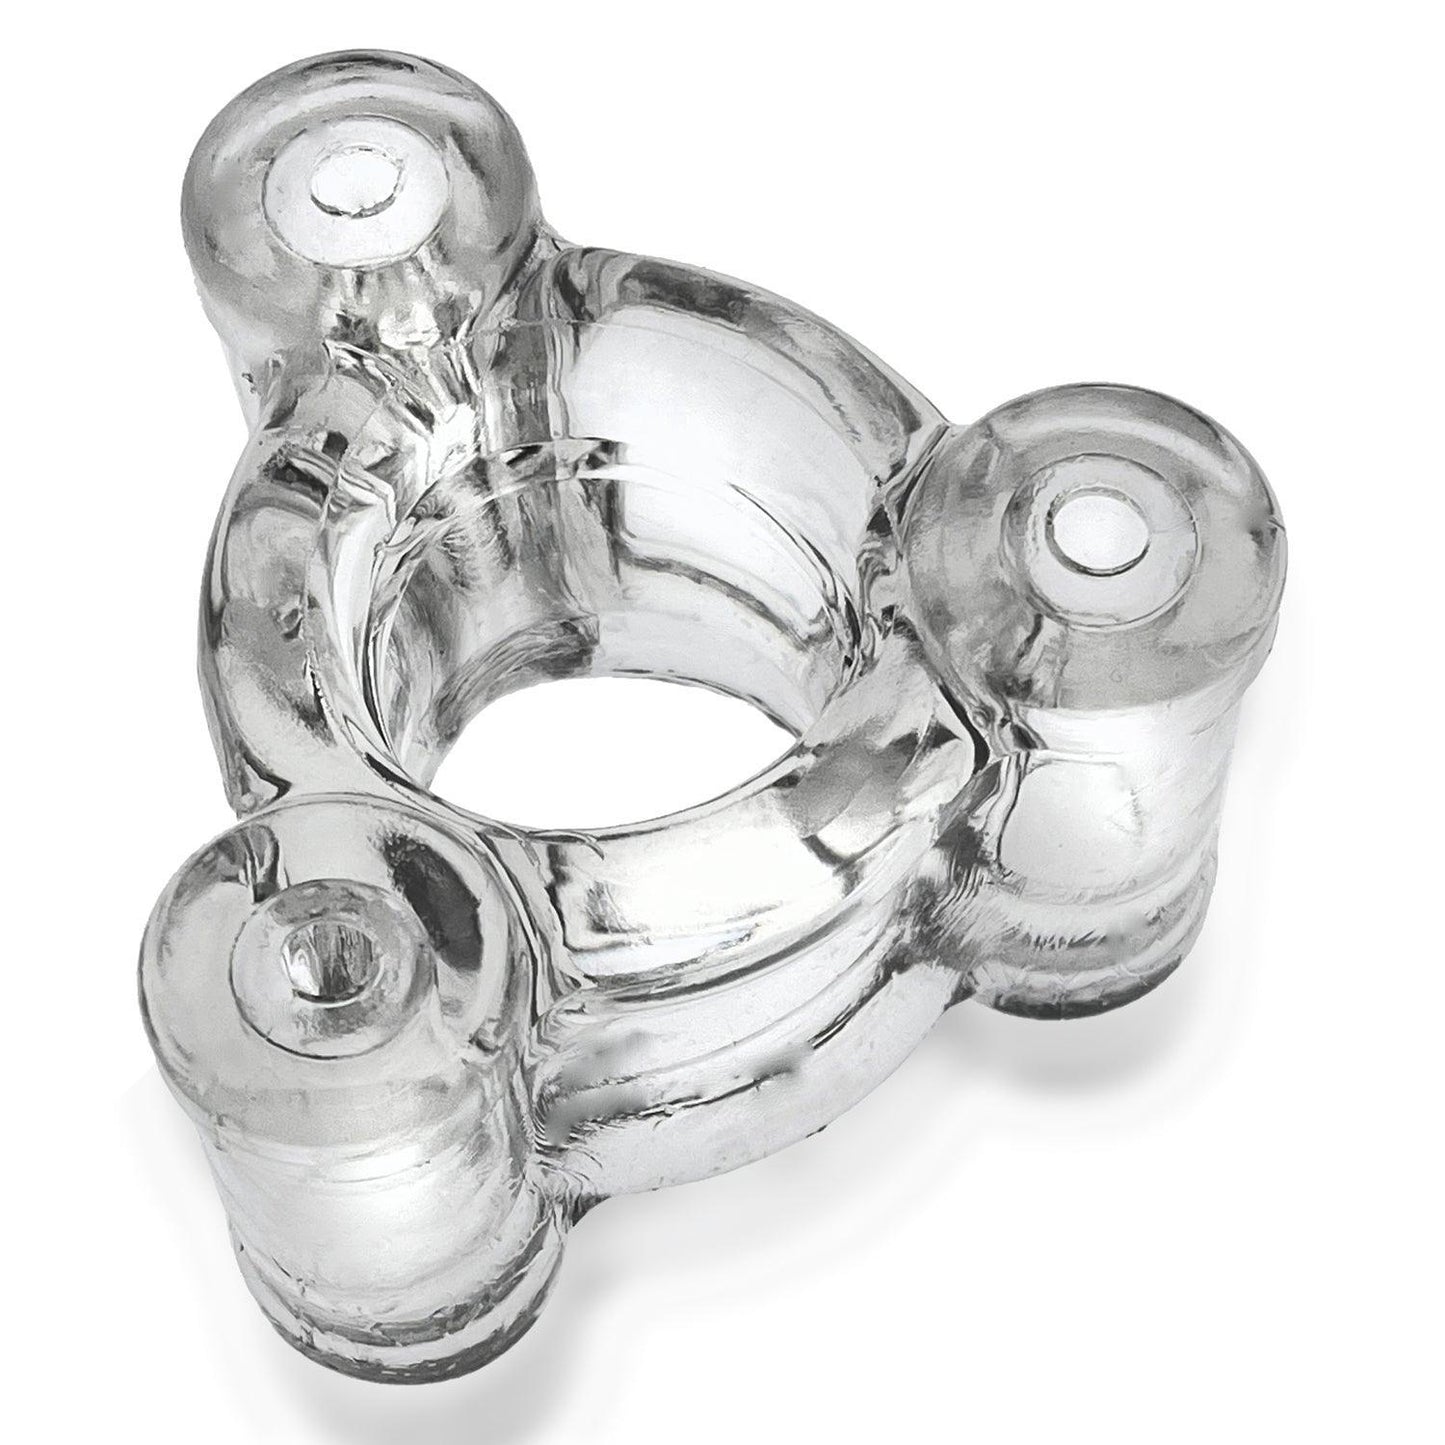 Heavy Squeeze Ballstretcher - Clear - My Sex Toy Hub